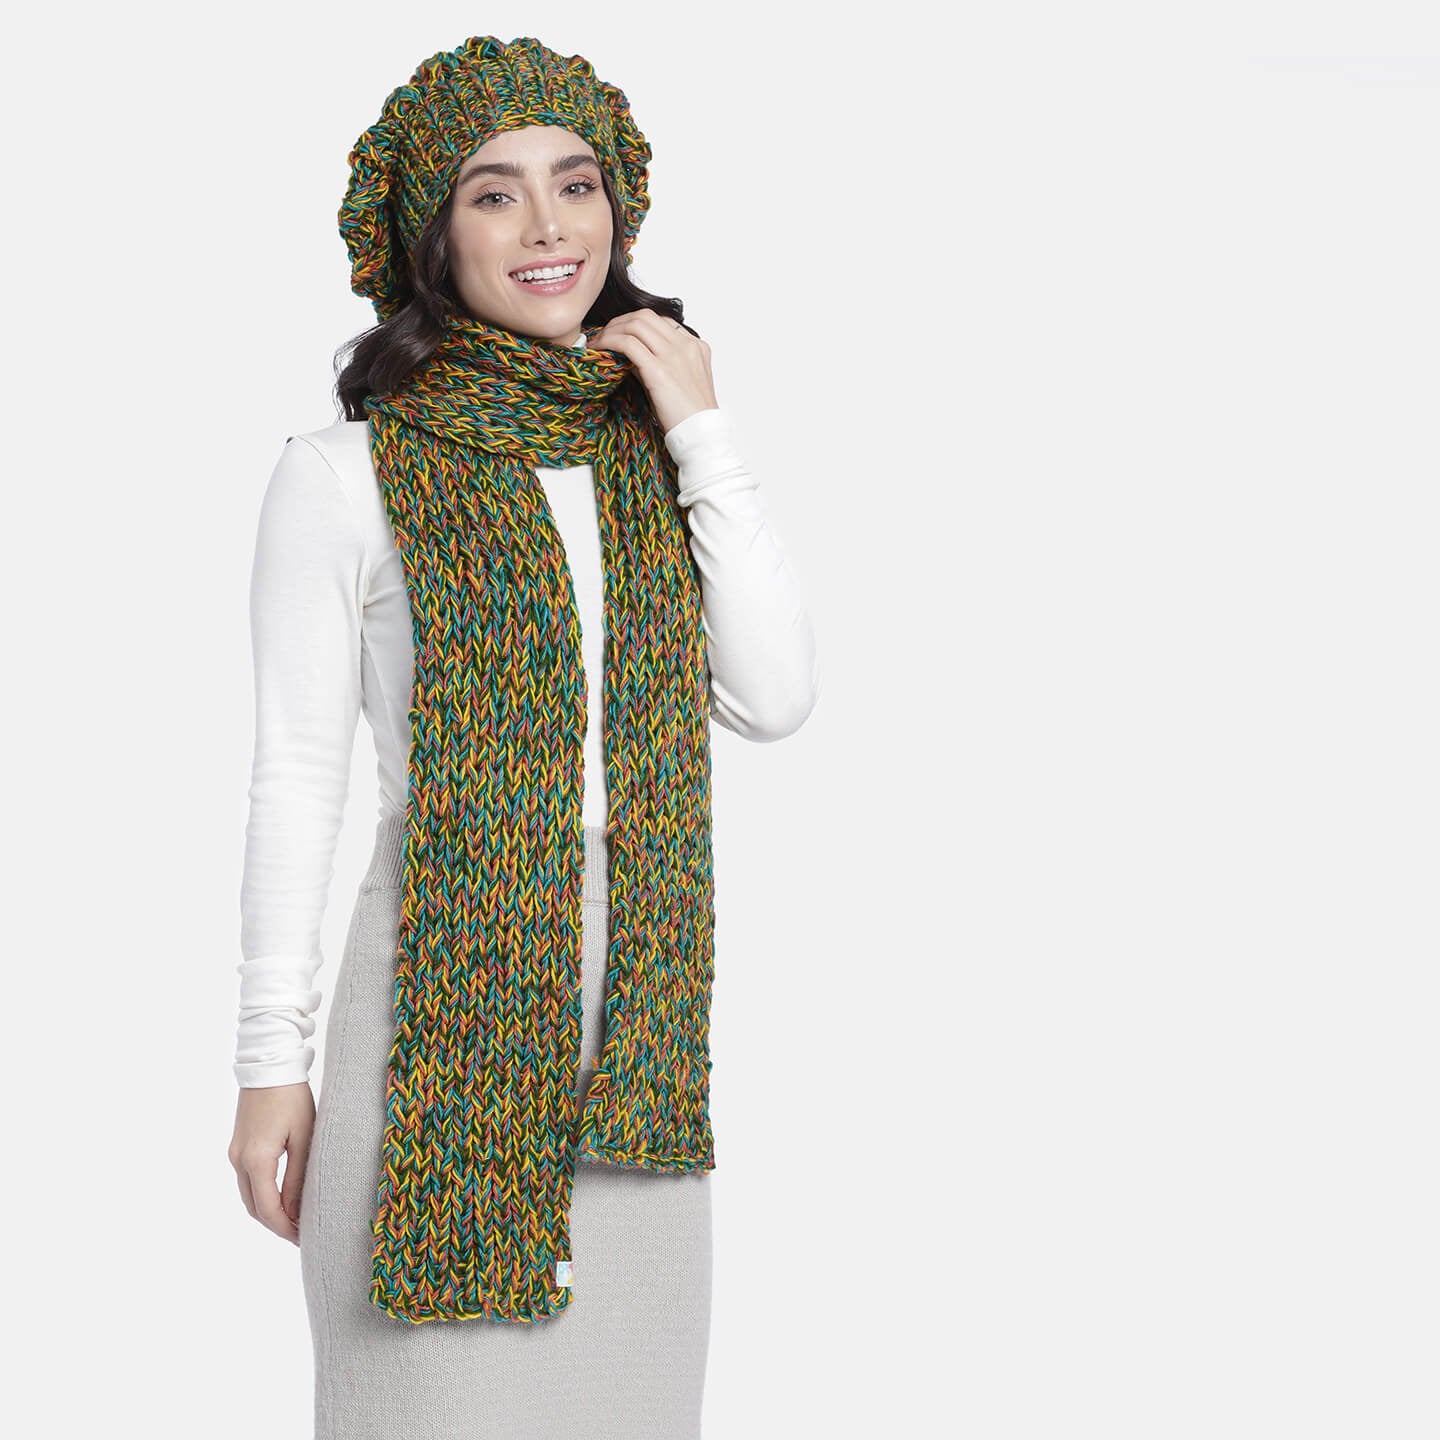 Beanie and Scarf Coordinating Set - 3186